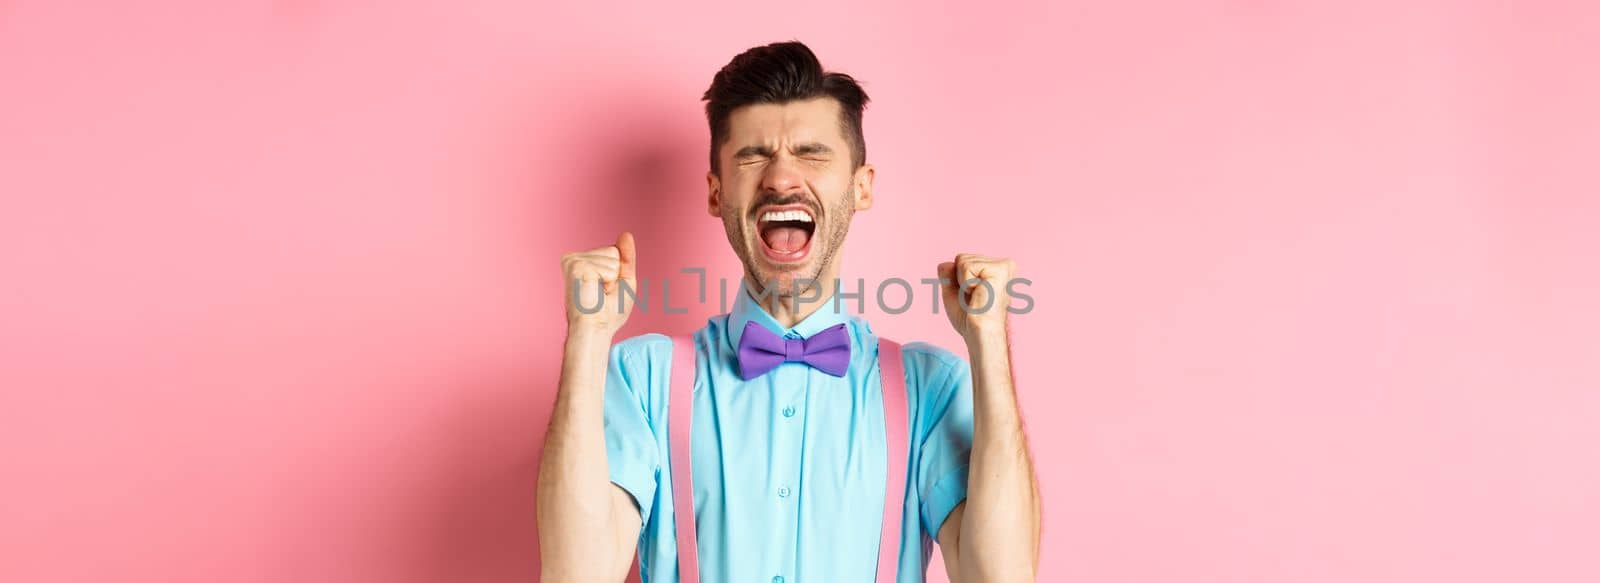 Relieved man shouting from happiness and joy, scream yes with closed eyes and clenched fists, celebrating victory, achieve goal and triumphing, standing over pink background.